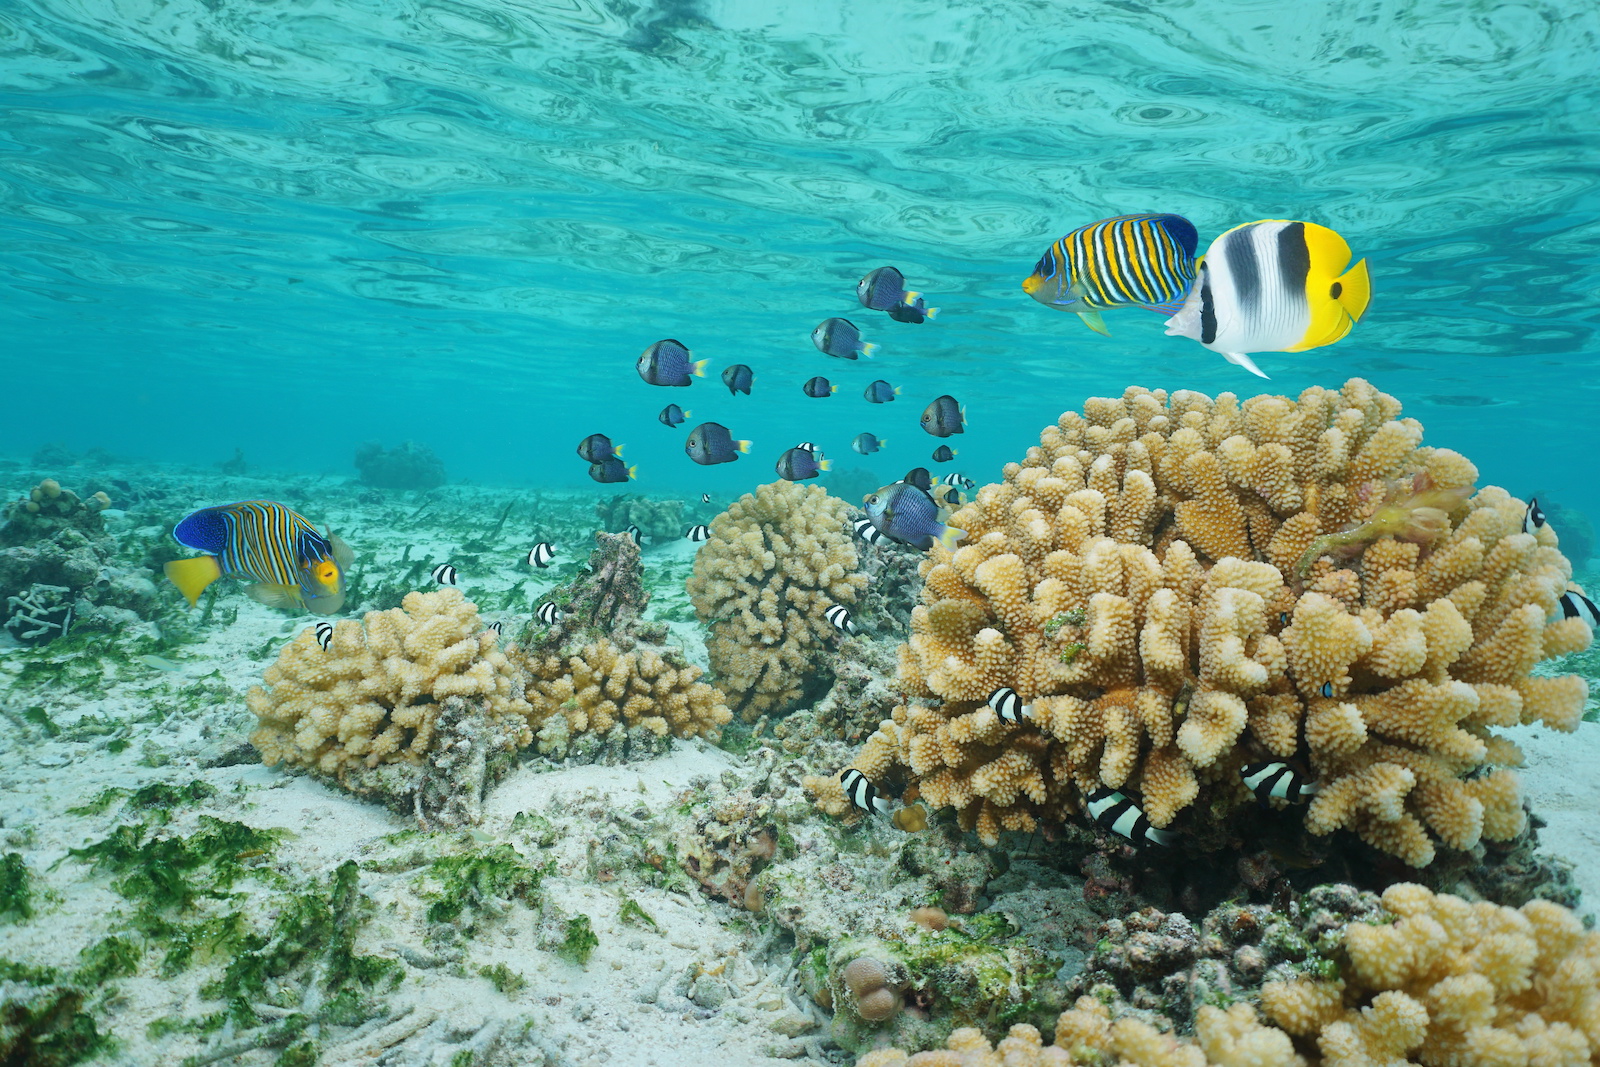 Tropical fish and cauliflower coral in shallow water, Moorea lagoon, Pacific Ocean, French Polynesia.